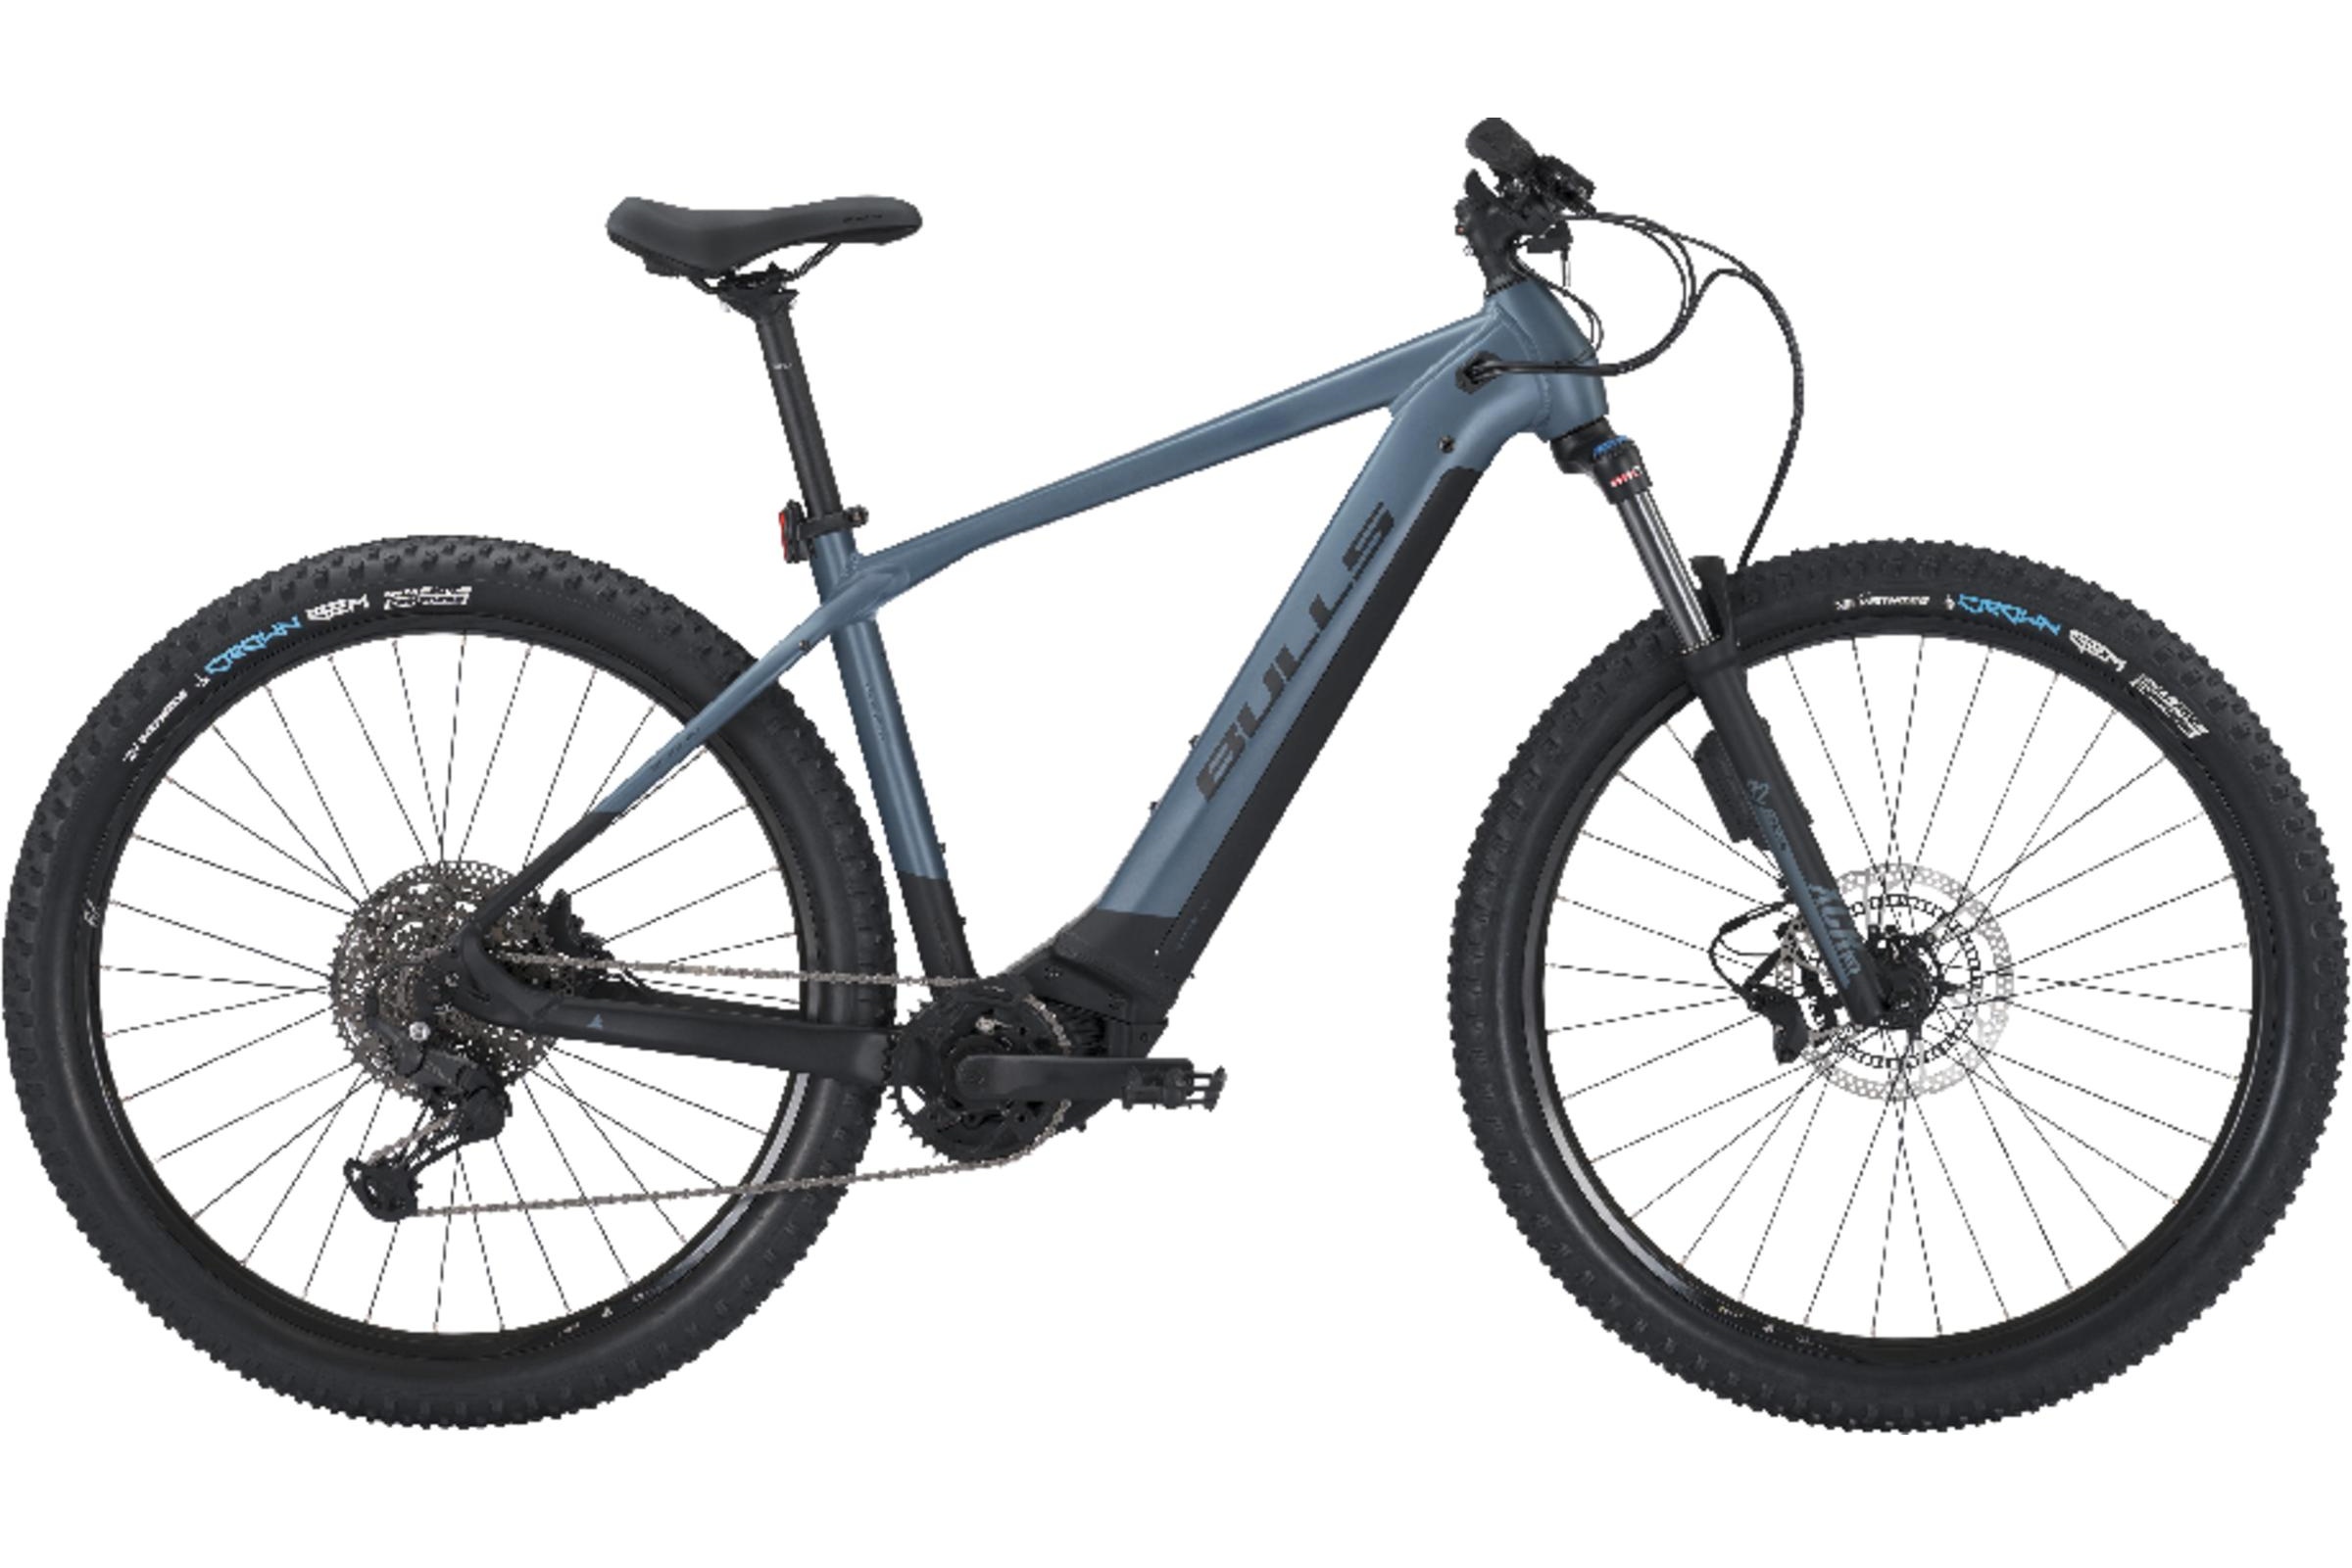 Bulls COPPERHEAD EVO 2 ABS 29Bulls COPPERHEAD EVO 2 ABS 29 Review